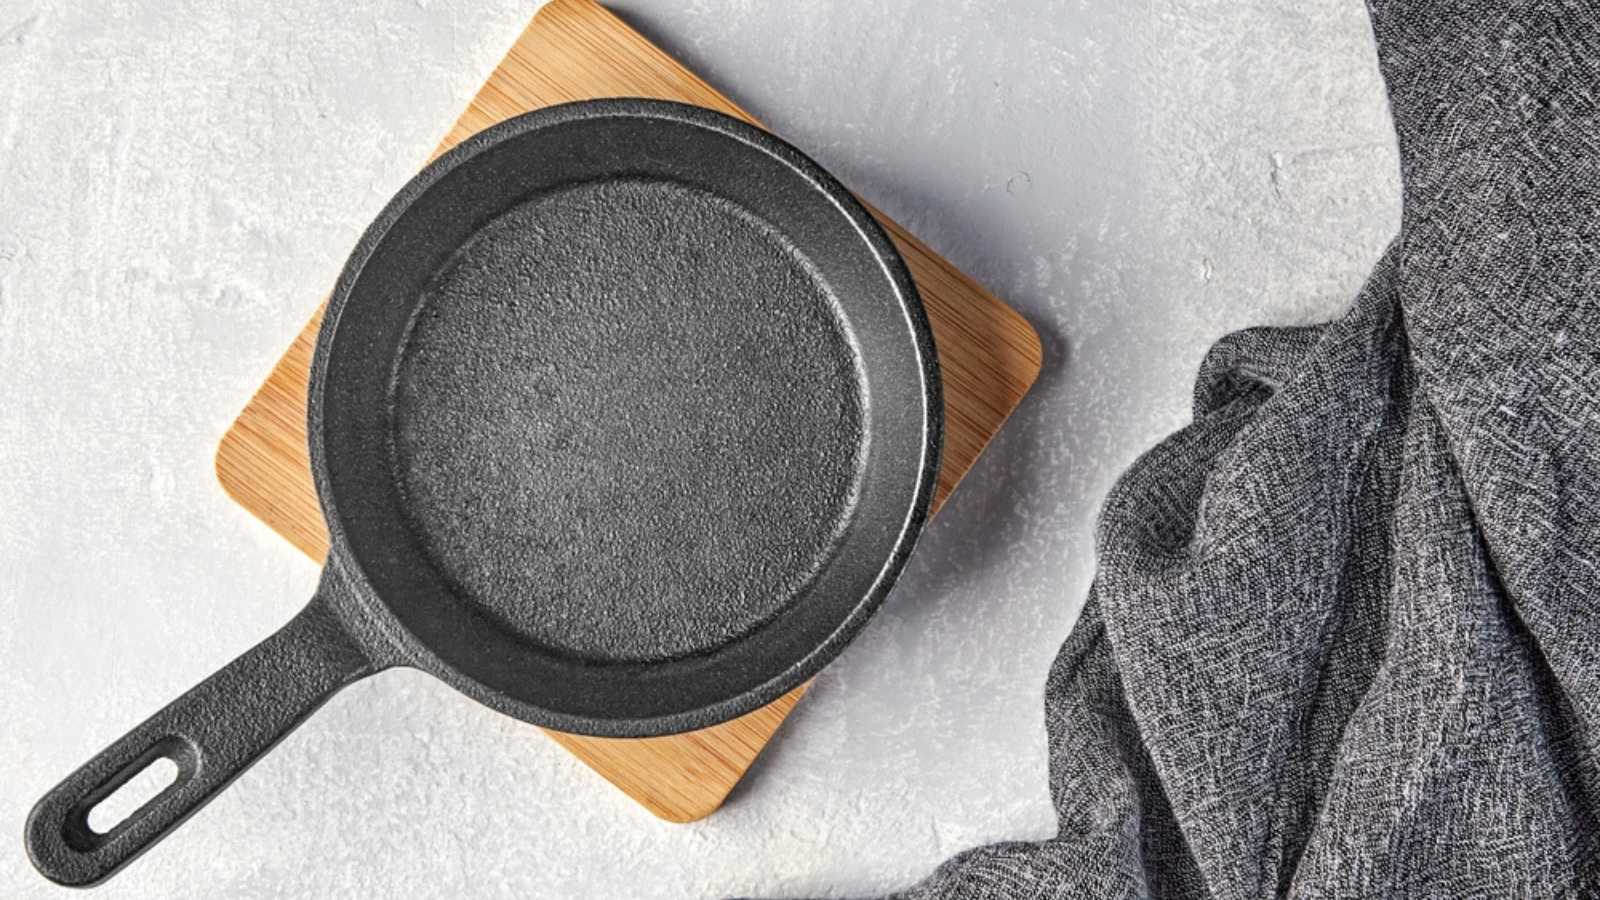 Black cast iron empty frying pan for one person on a wooden stand and a gray kitchen towel on a gray concrete background. Top view with copy space